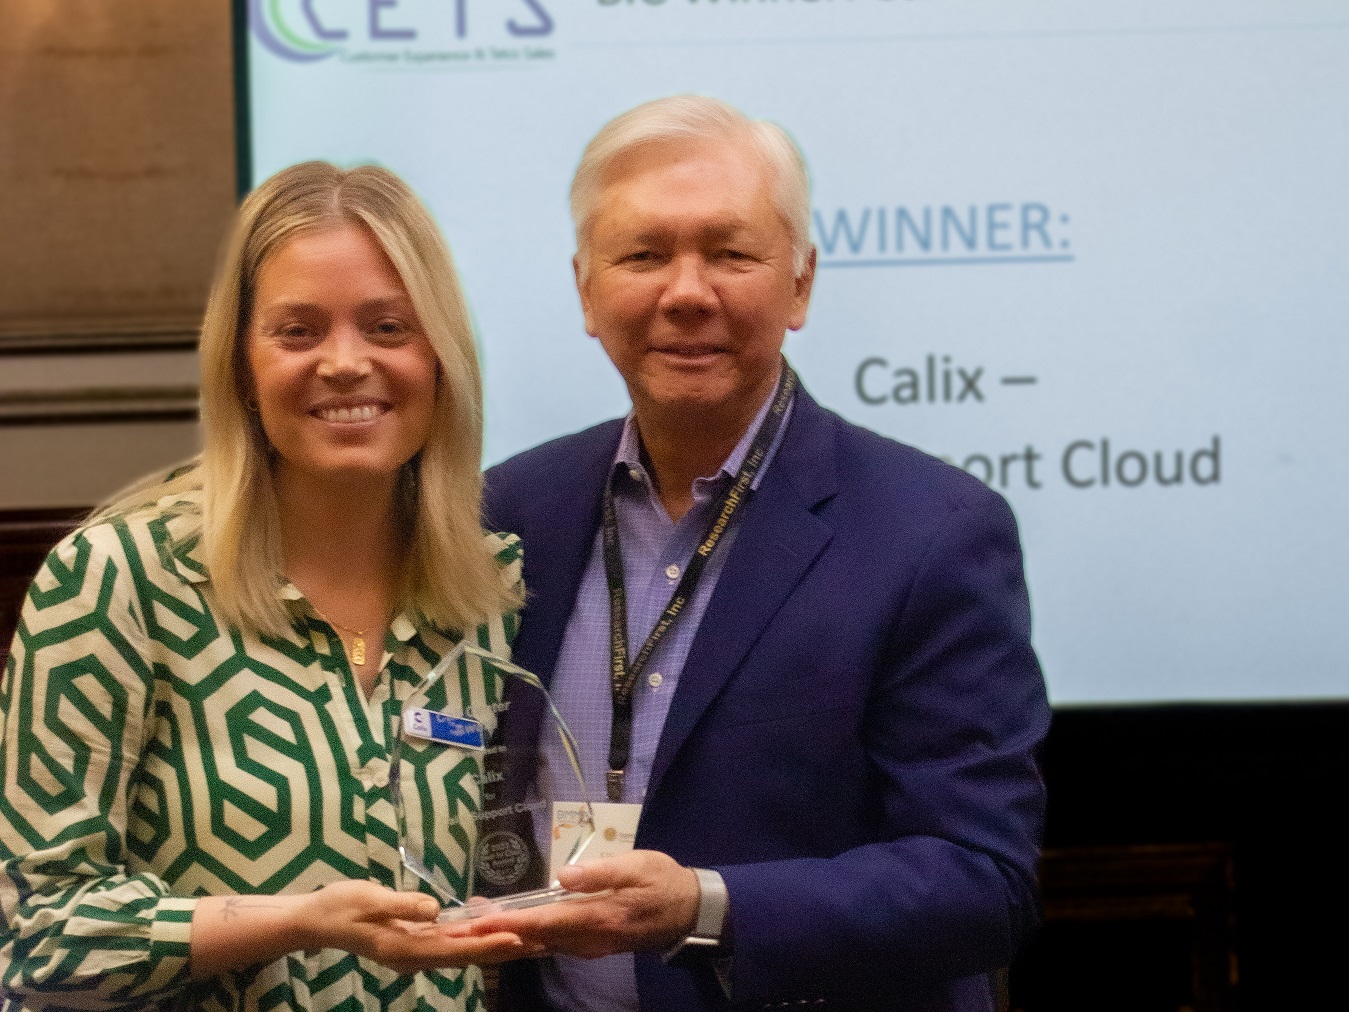 Tiffany Shurr, Area Vice President - Cloud Solutions of Calix (left) accepts the Call Center Award from Ellis Hill, President of ResearchFirst (right).